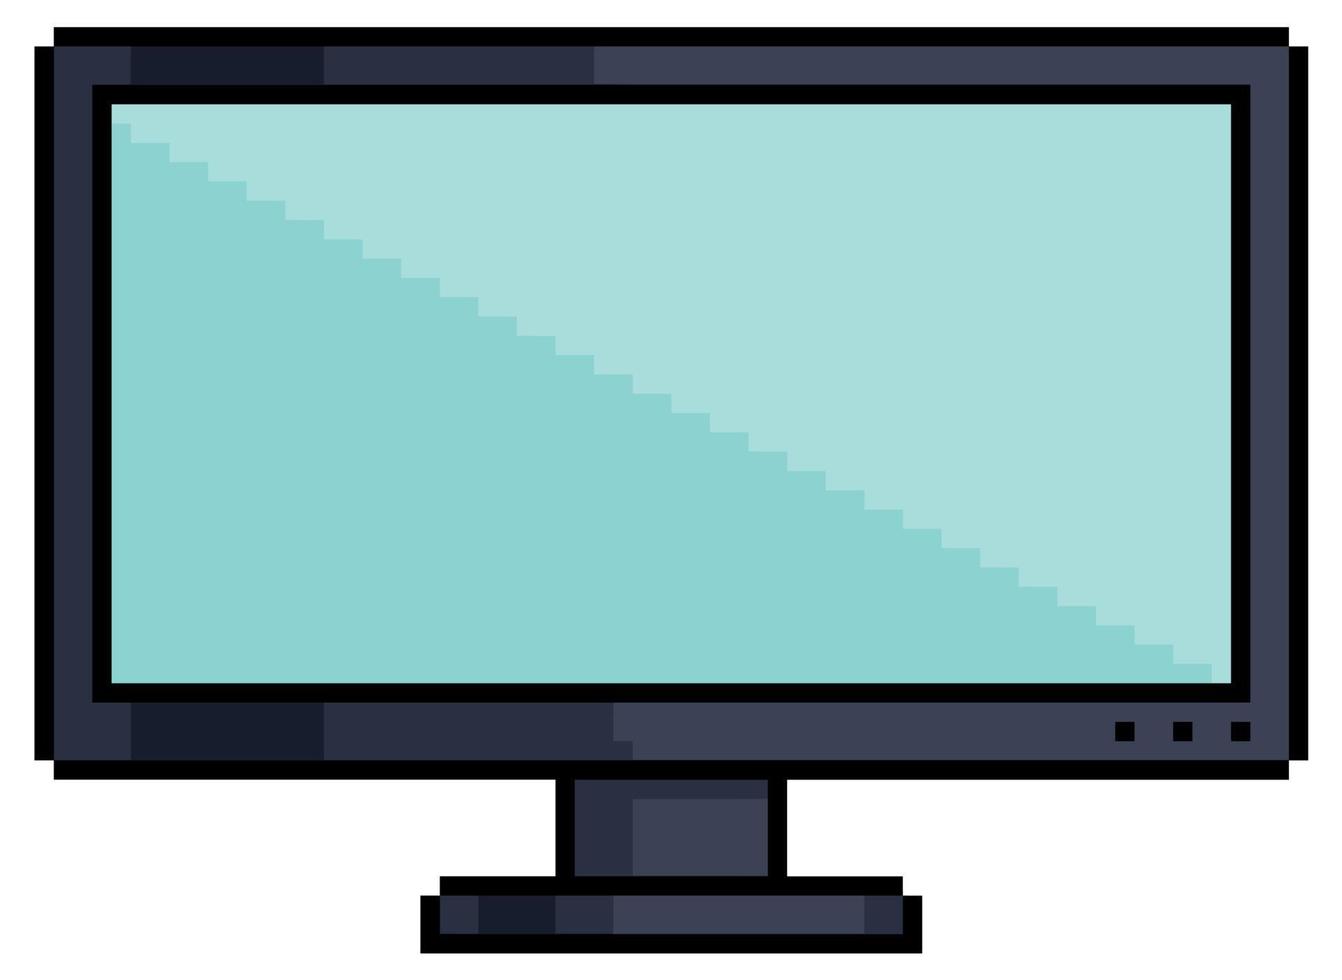 Pixel art monitor computer vector icon for 8bit game on white background